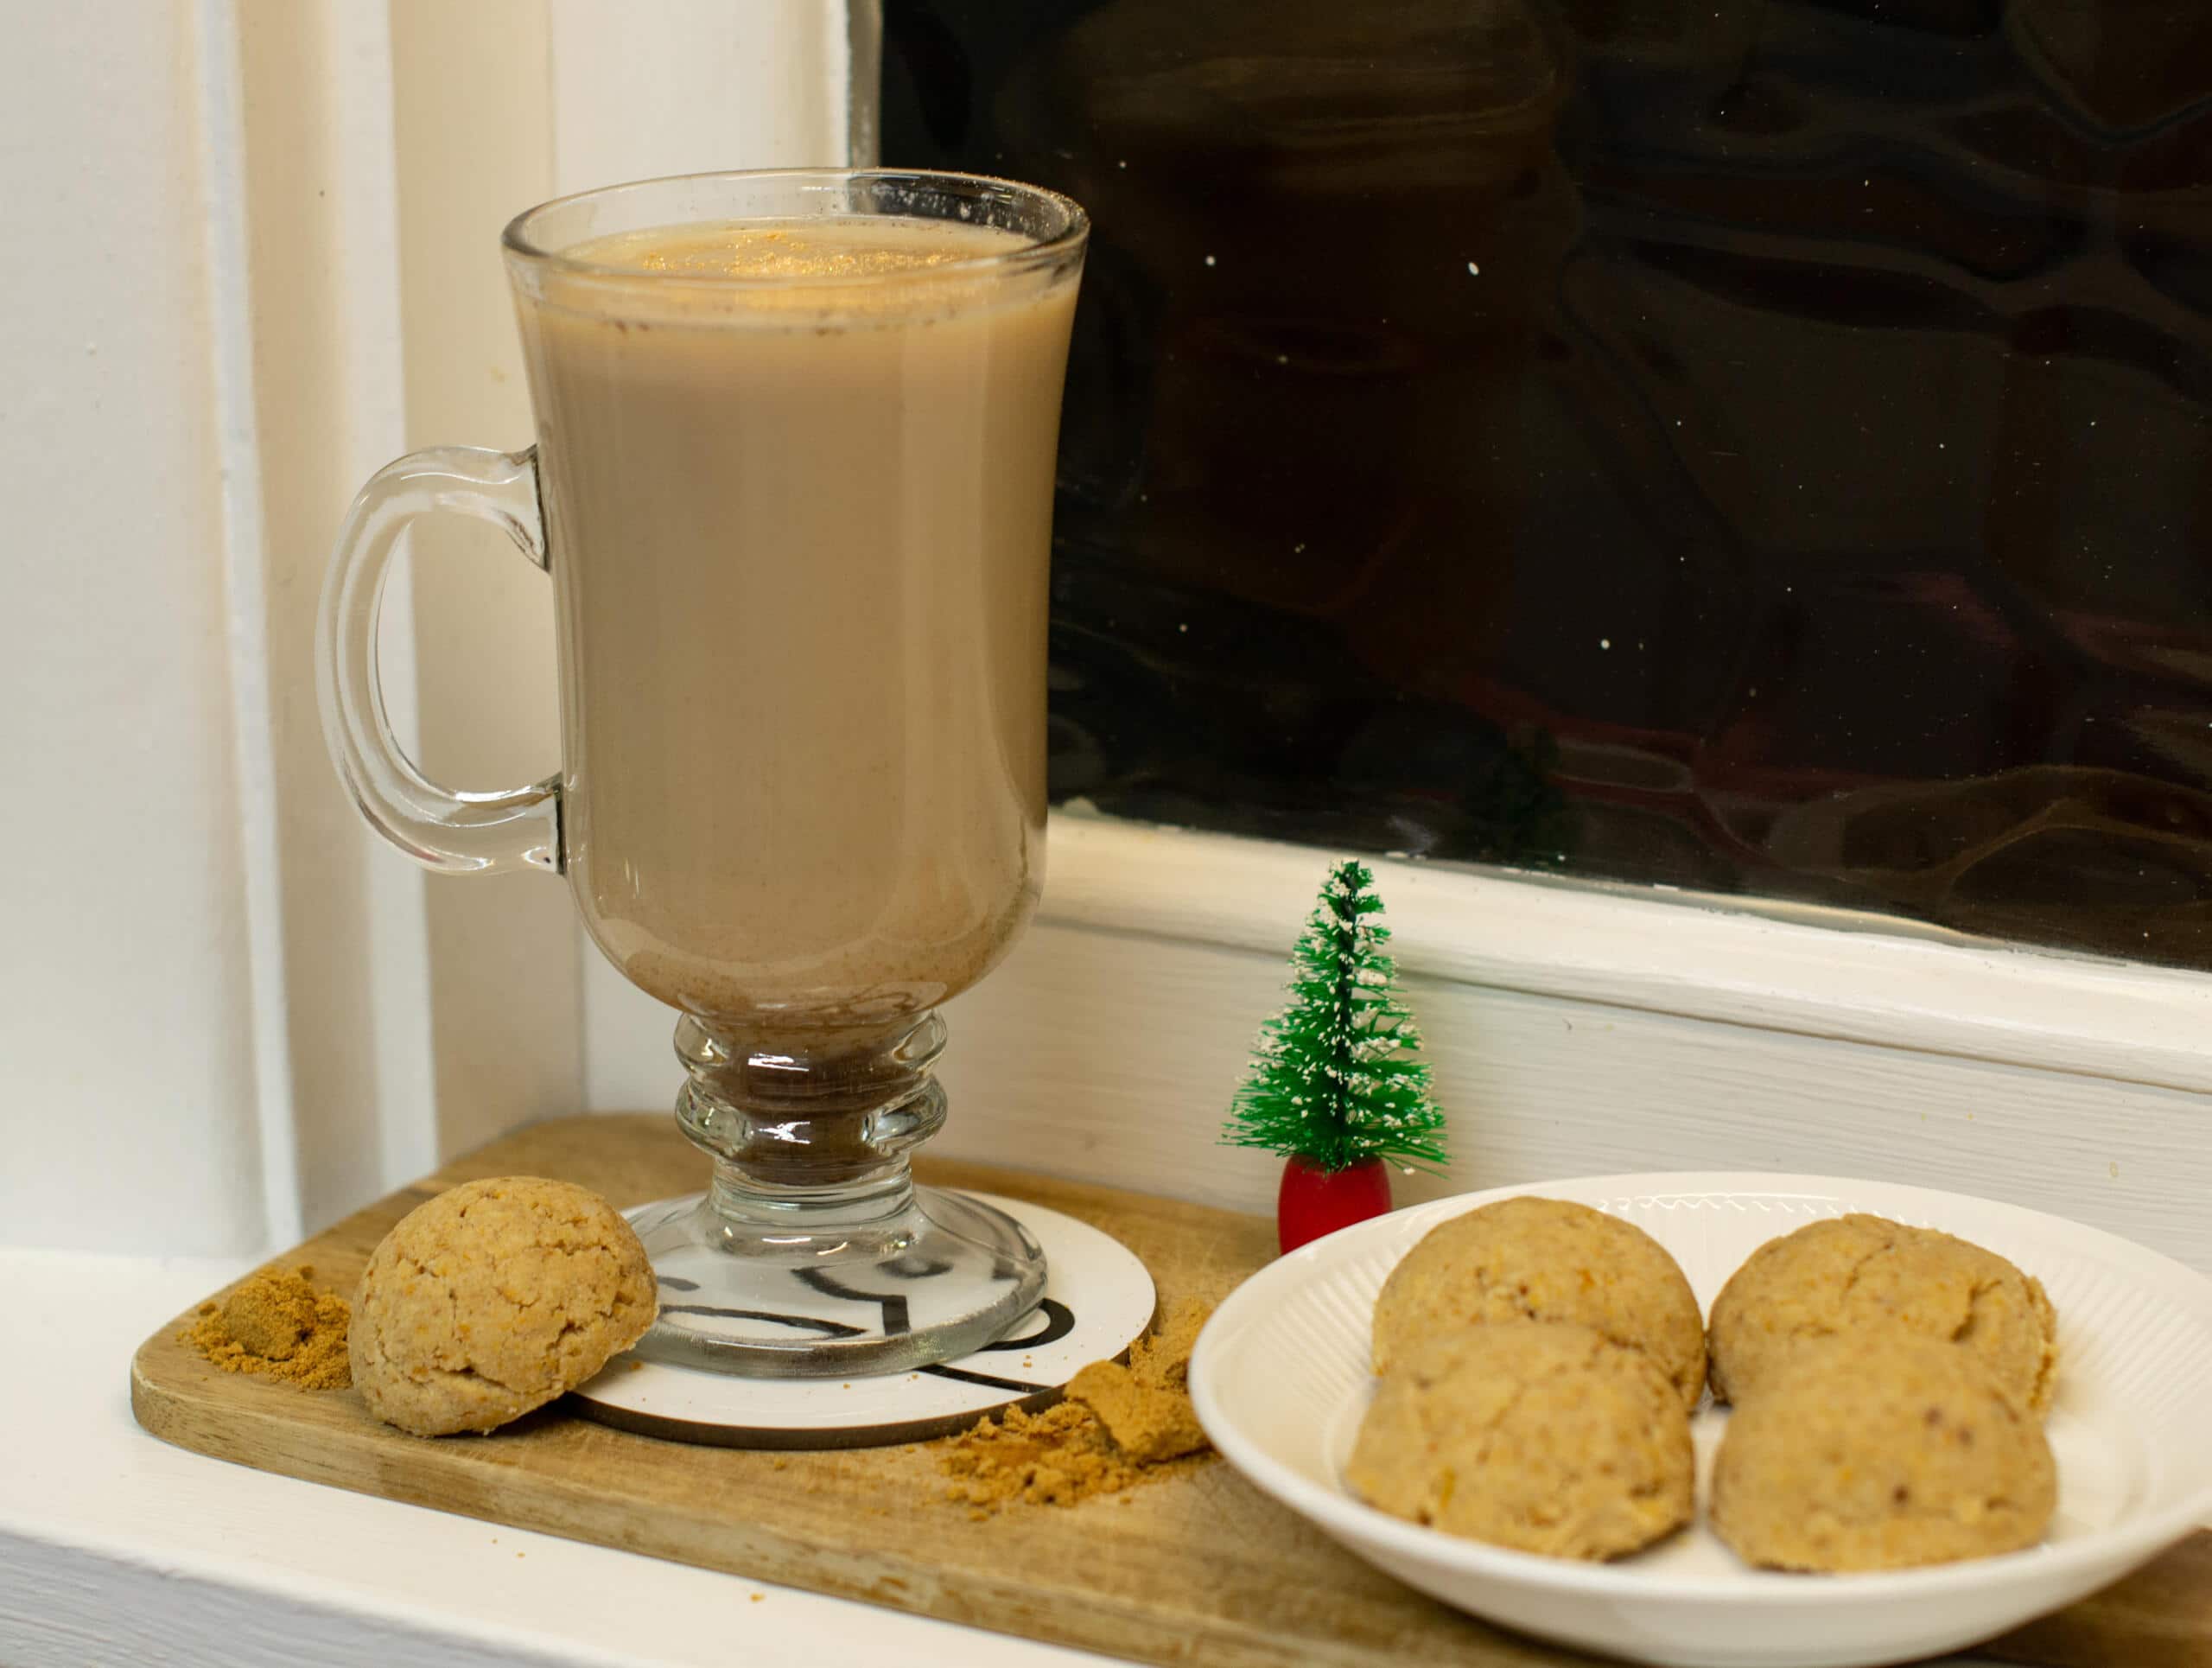 Gingerbread latte beside plate of cookies and mini Christmas tree